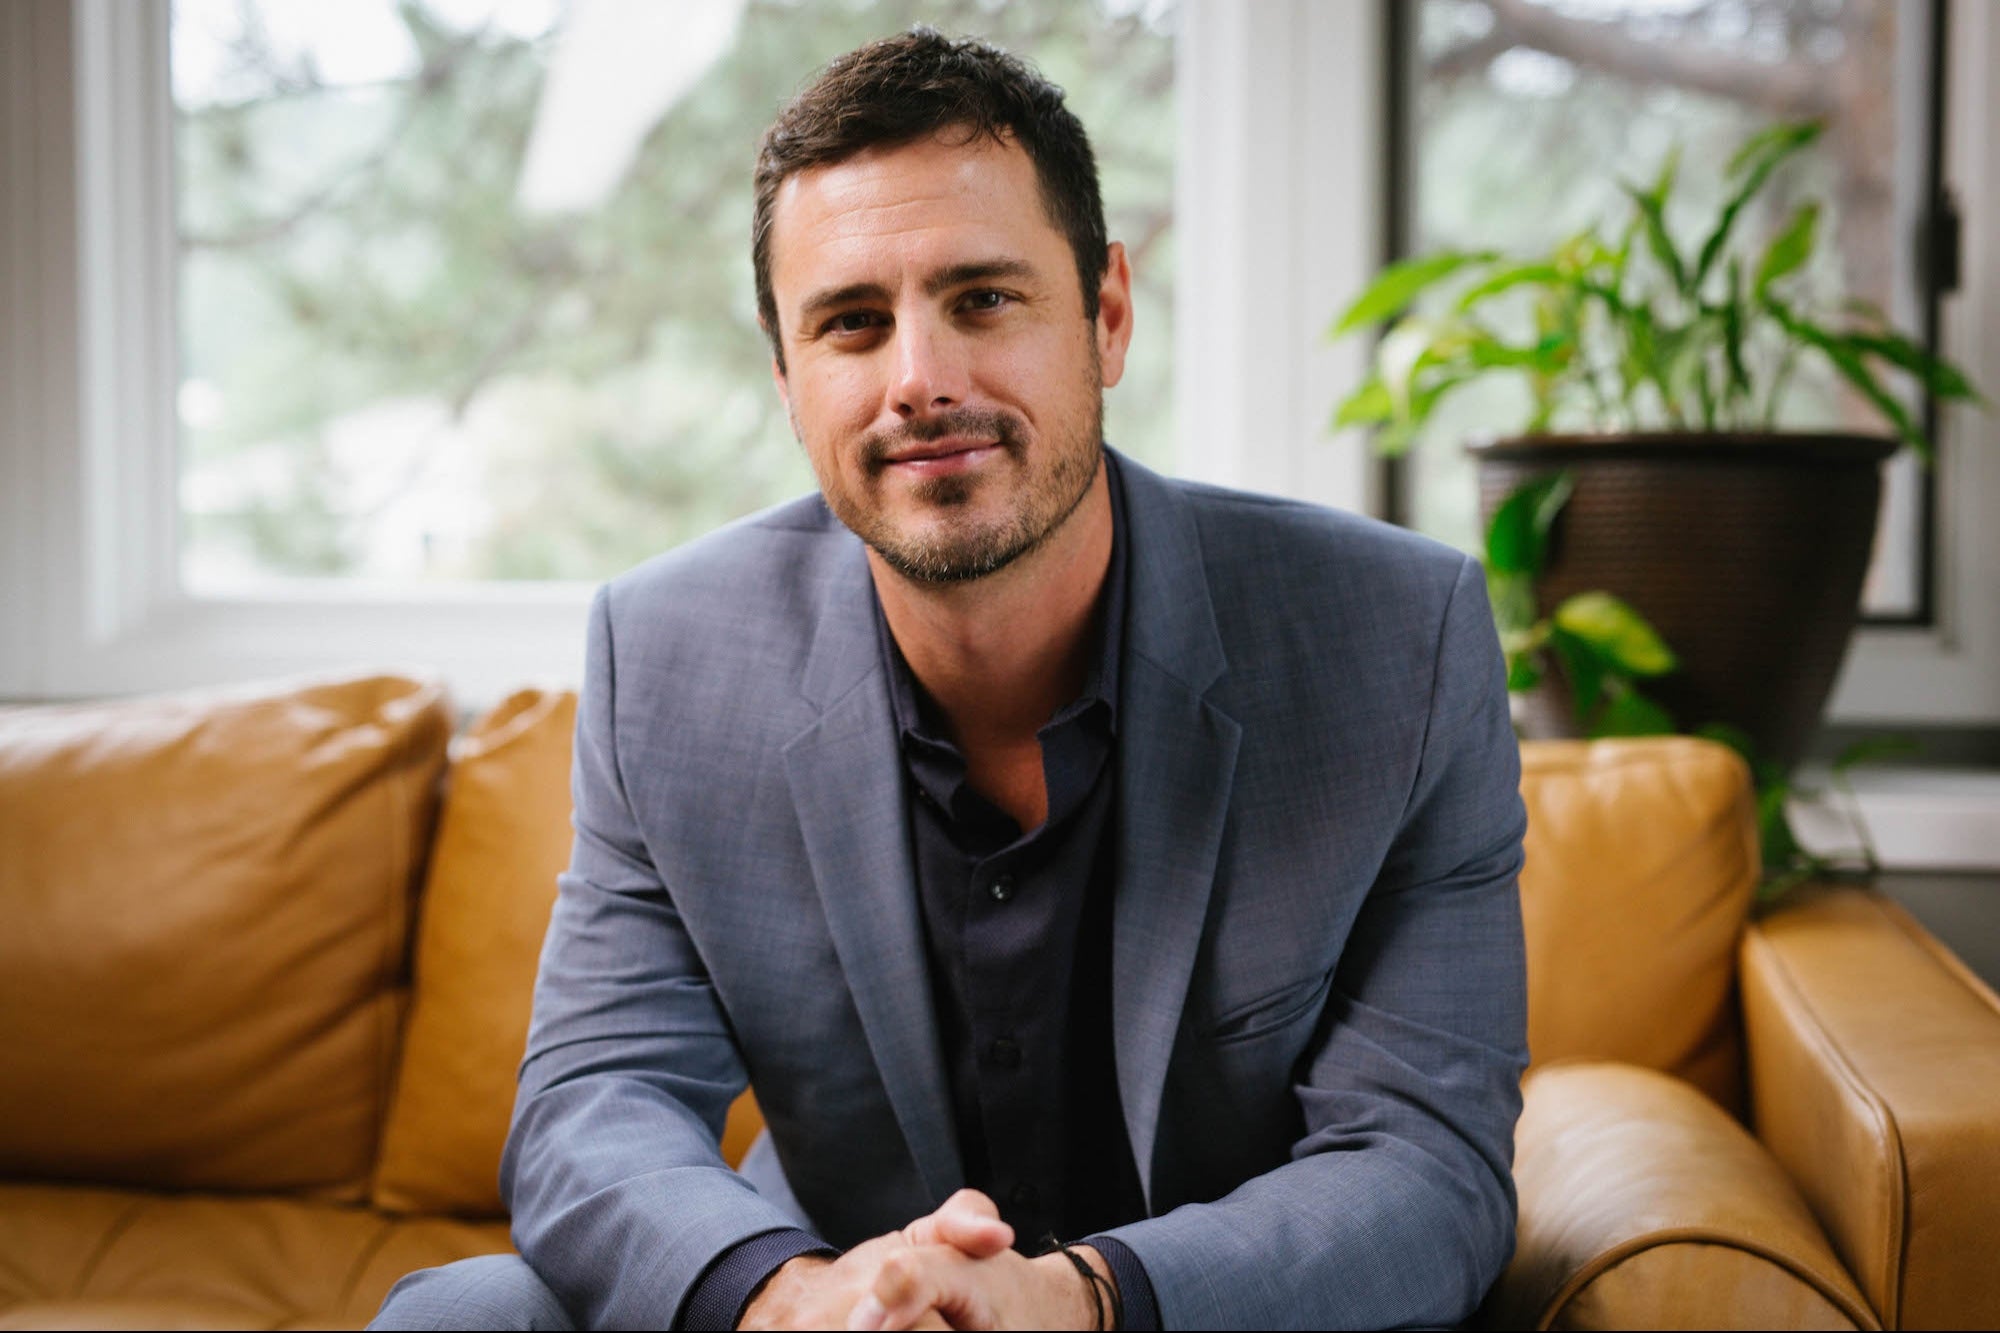 Ben Higgins Talks Overcoming Insecurity, Finding Purpose and Juggling Multiple Business Ventures